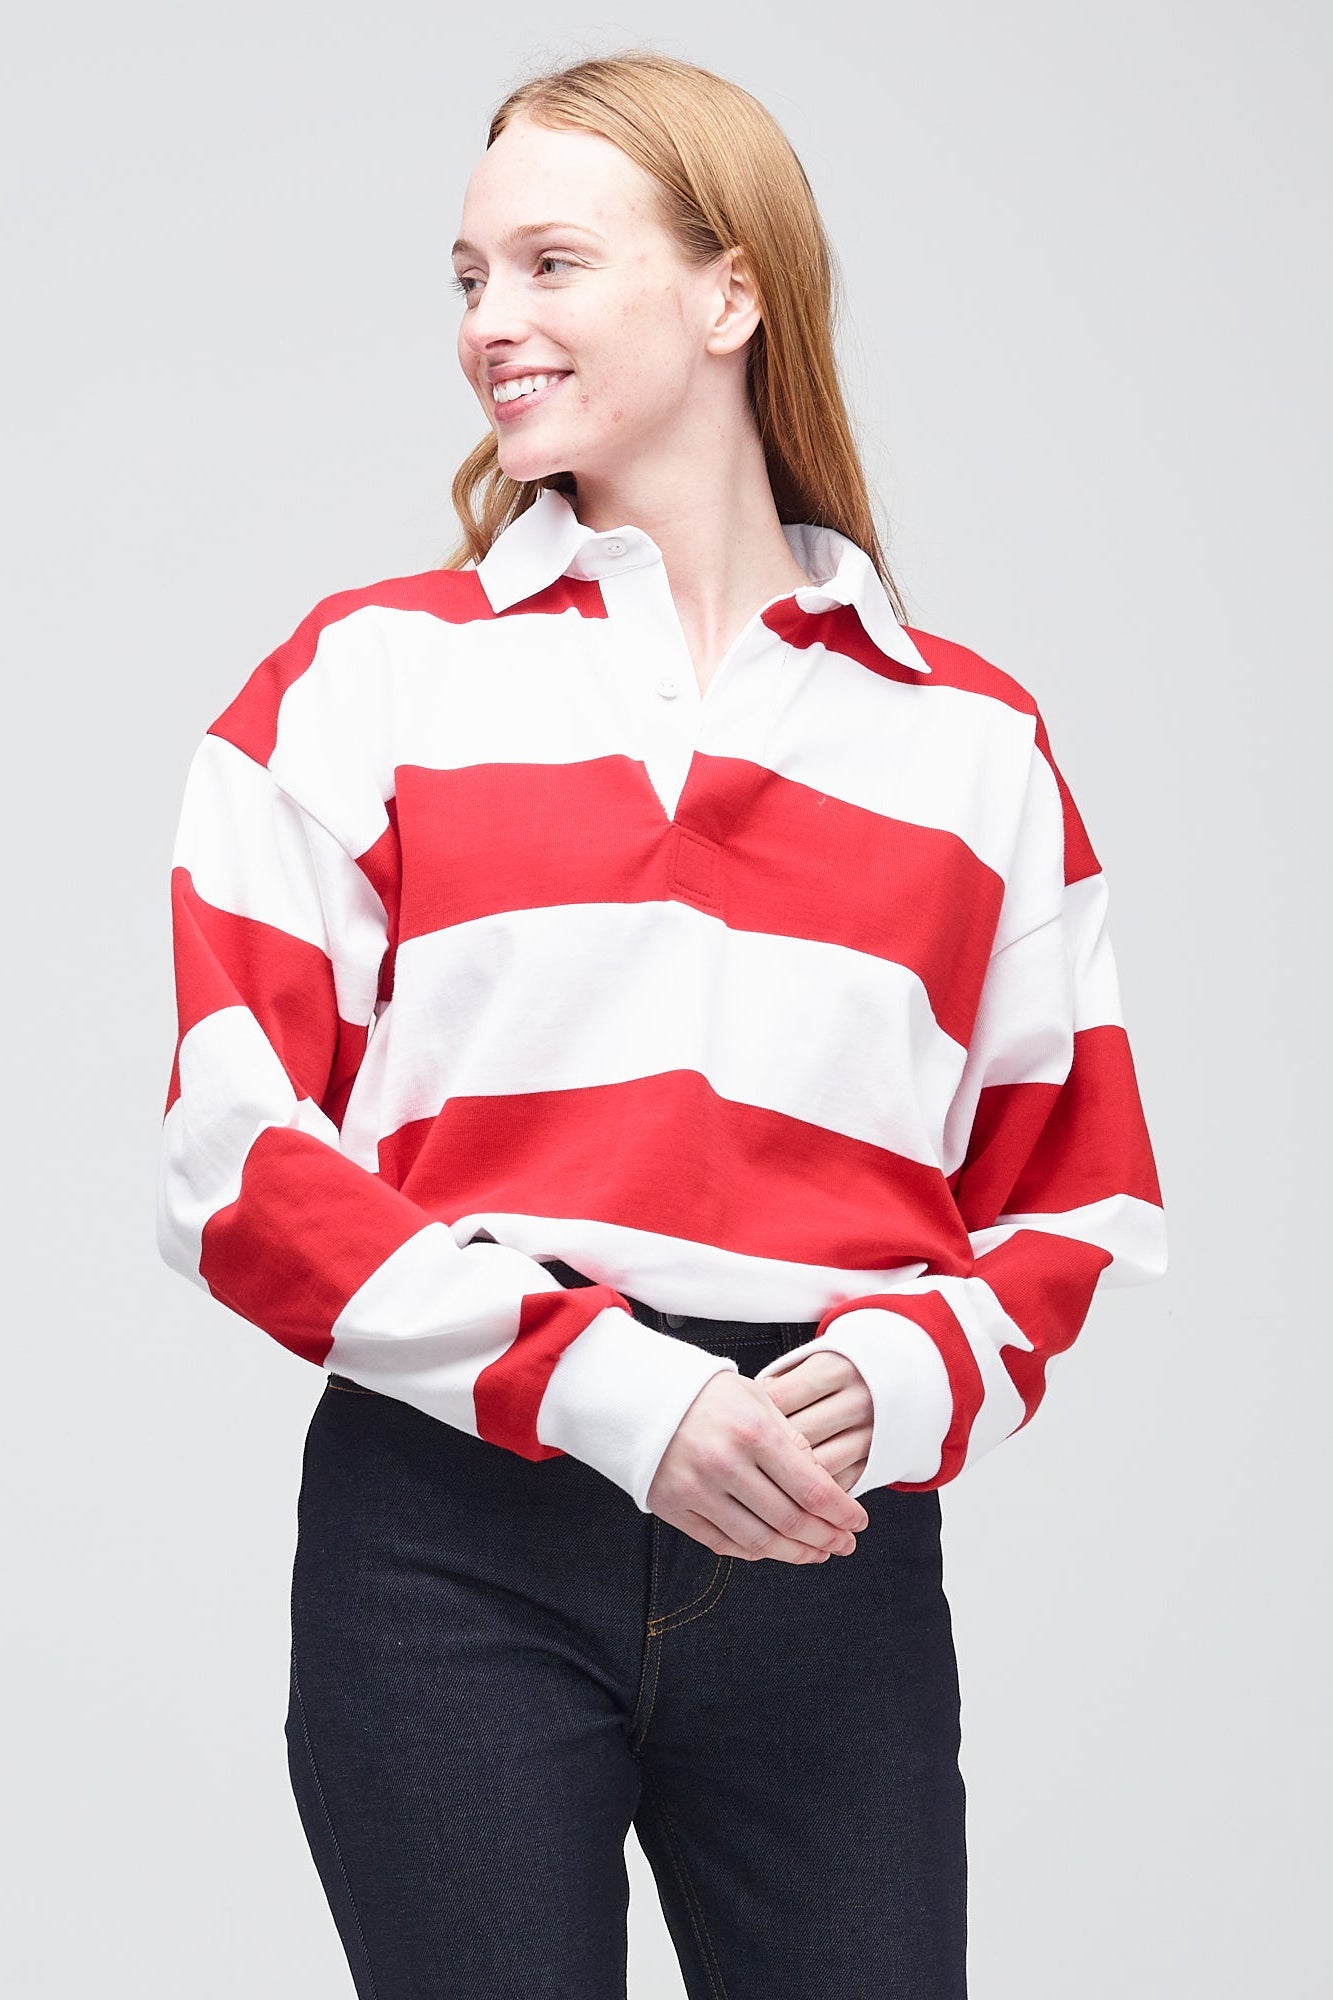 Female_Wide-Stripped-Rugby-Shirt_Red-White_Front_Tucked